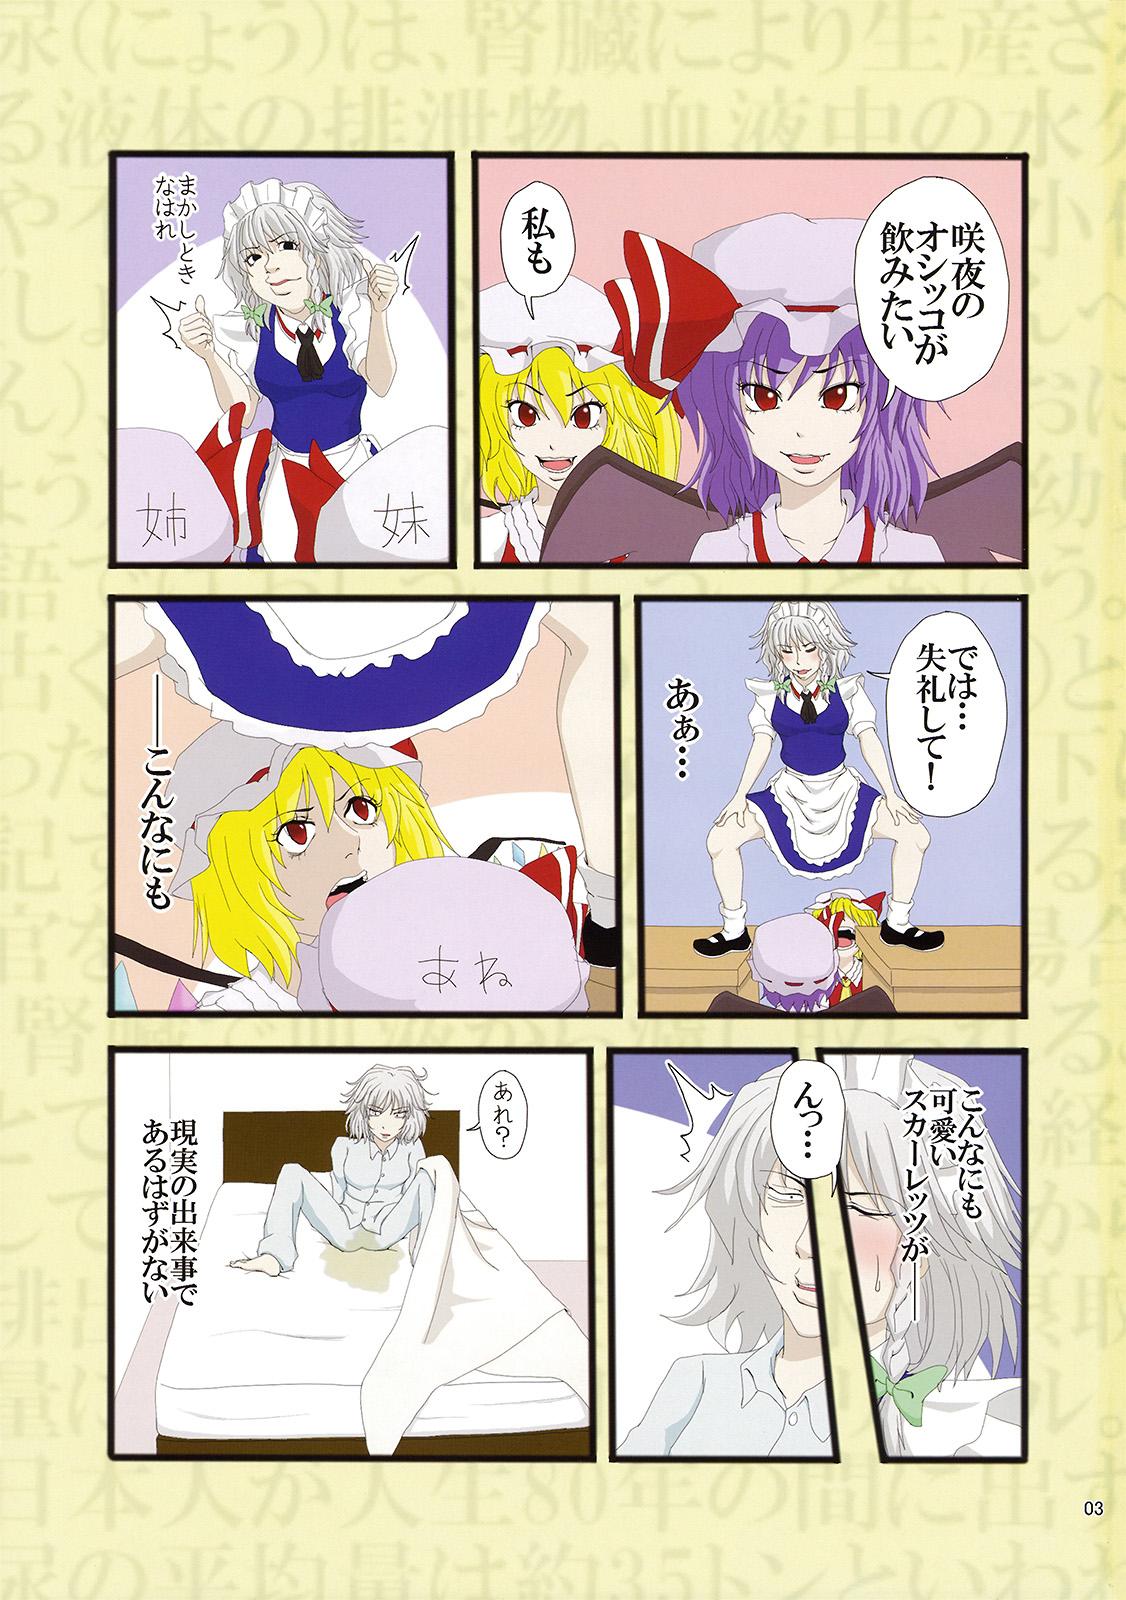 Soloboy 完全で瀟洒な尿者 - Touhou project Missionary Position Porn - Picture 3